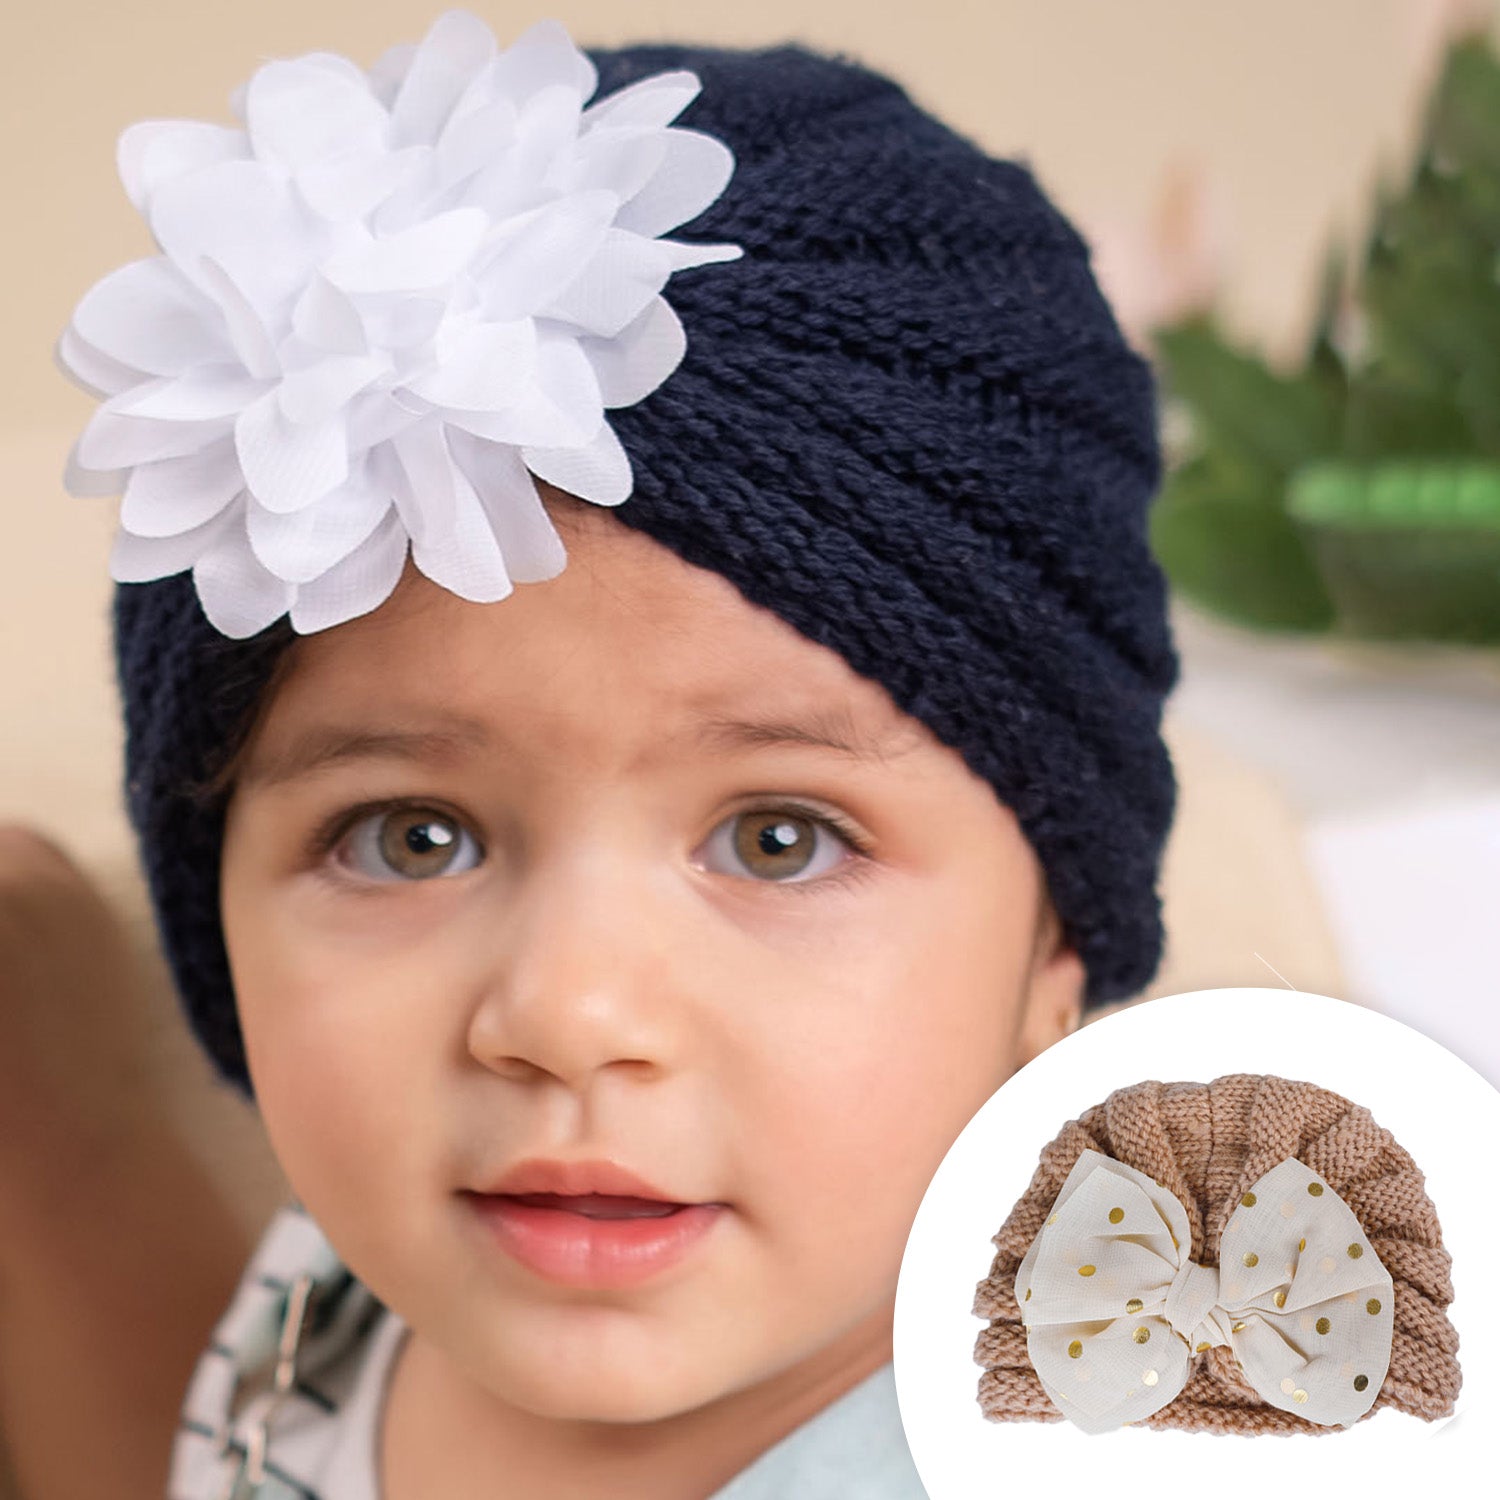 Baby Moo Partywear Sequence Bow 2 Pack Turban Caps - Brown And Navy Blue - Baby Moo